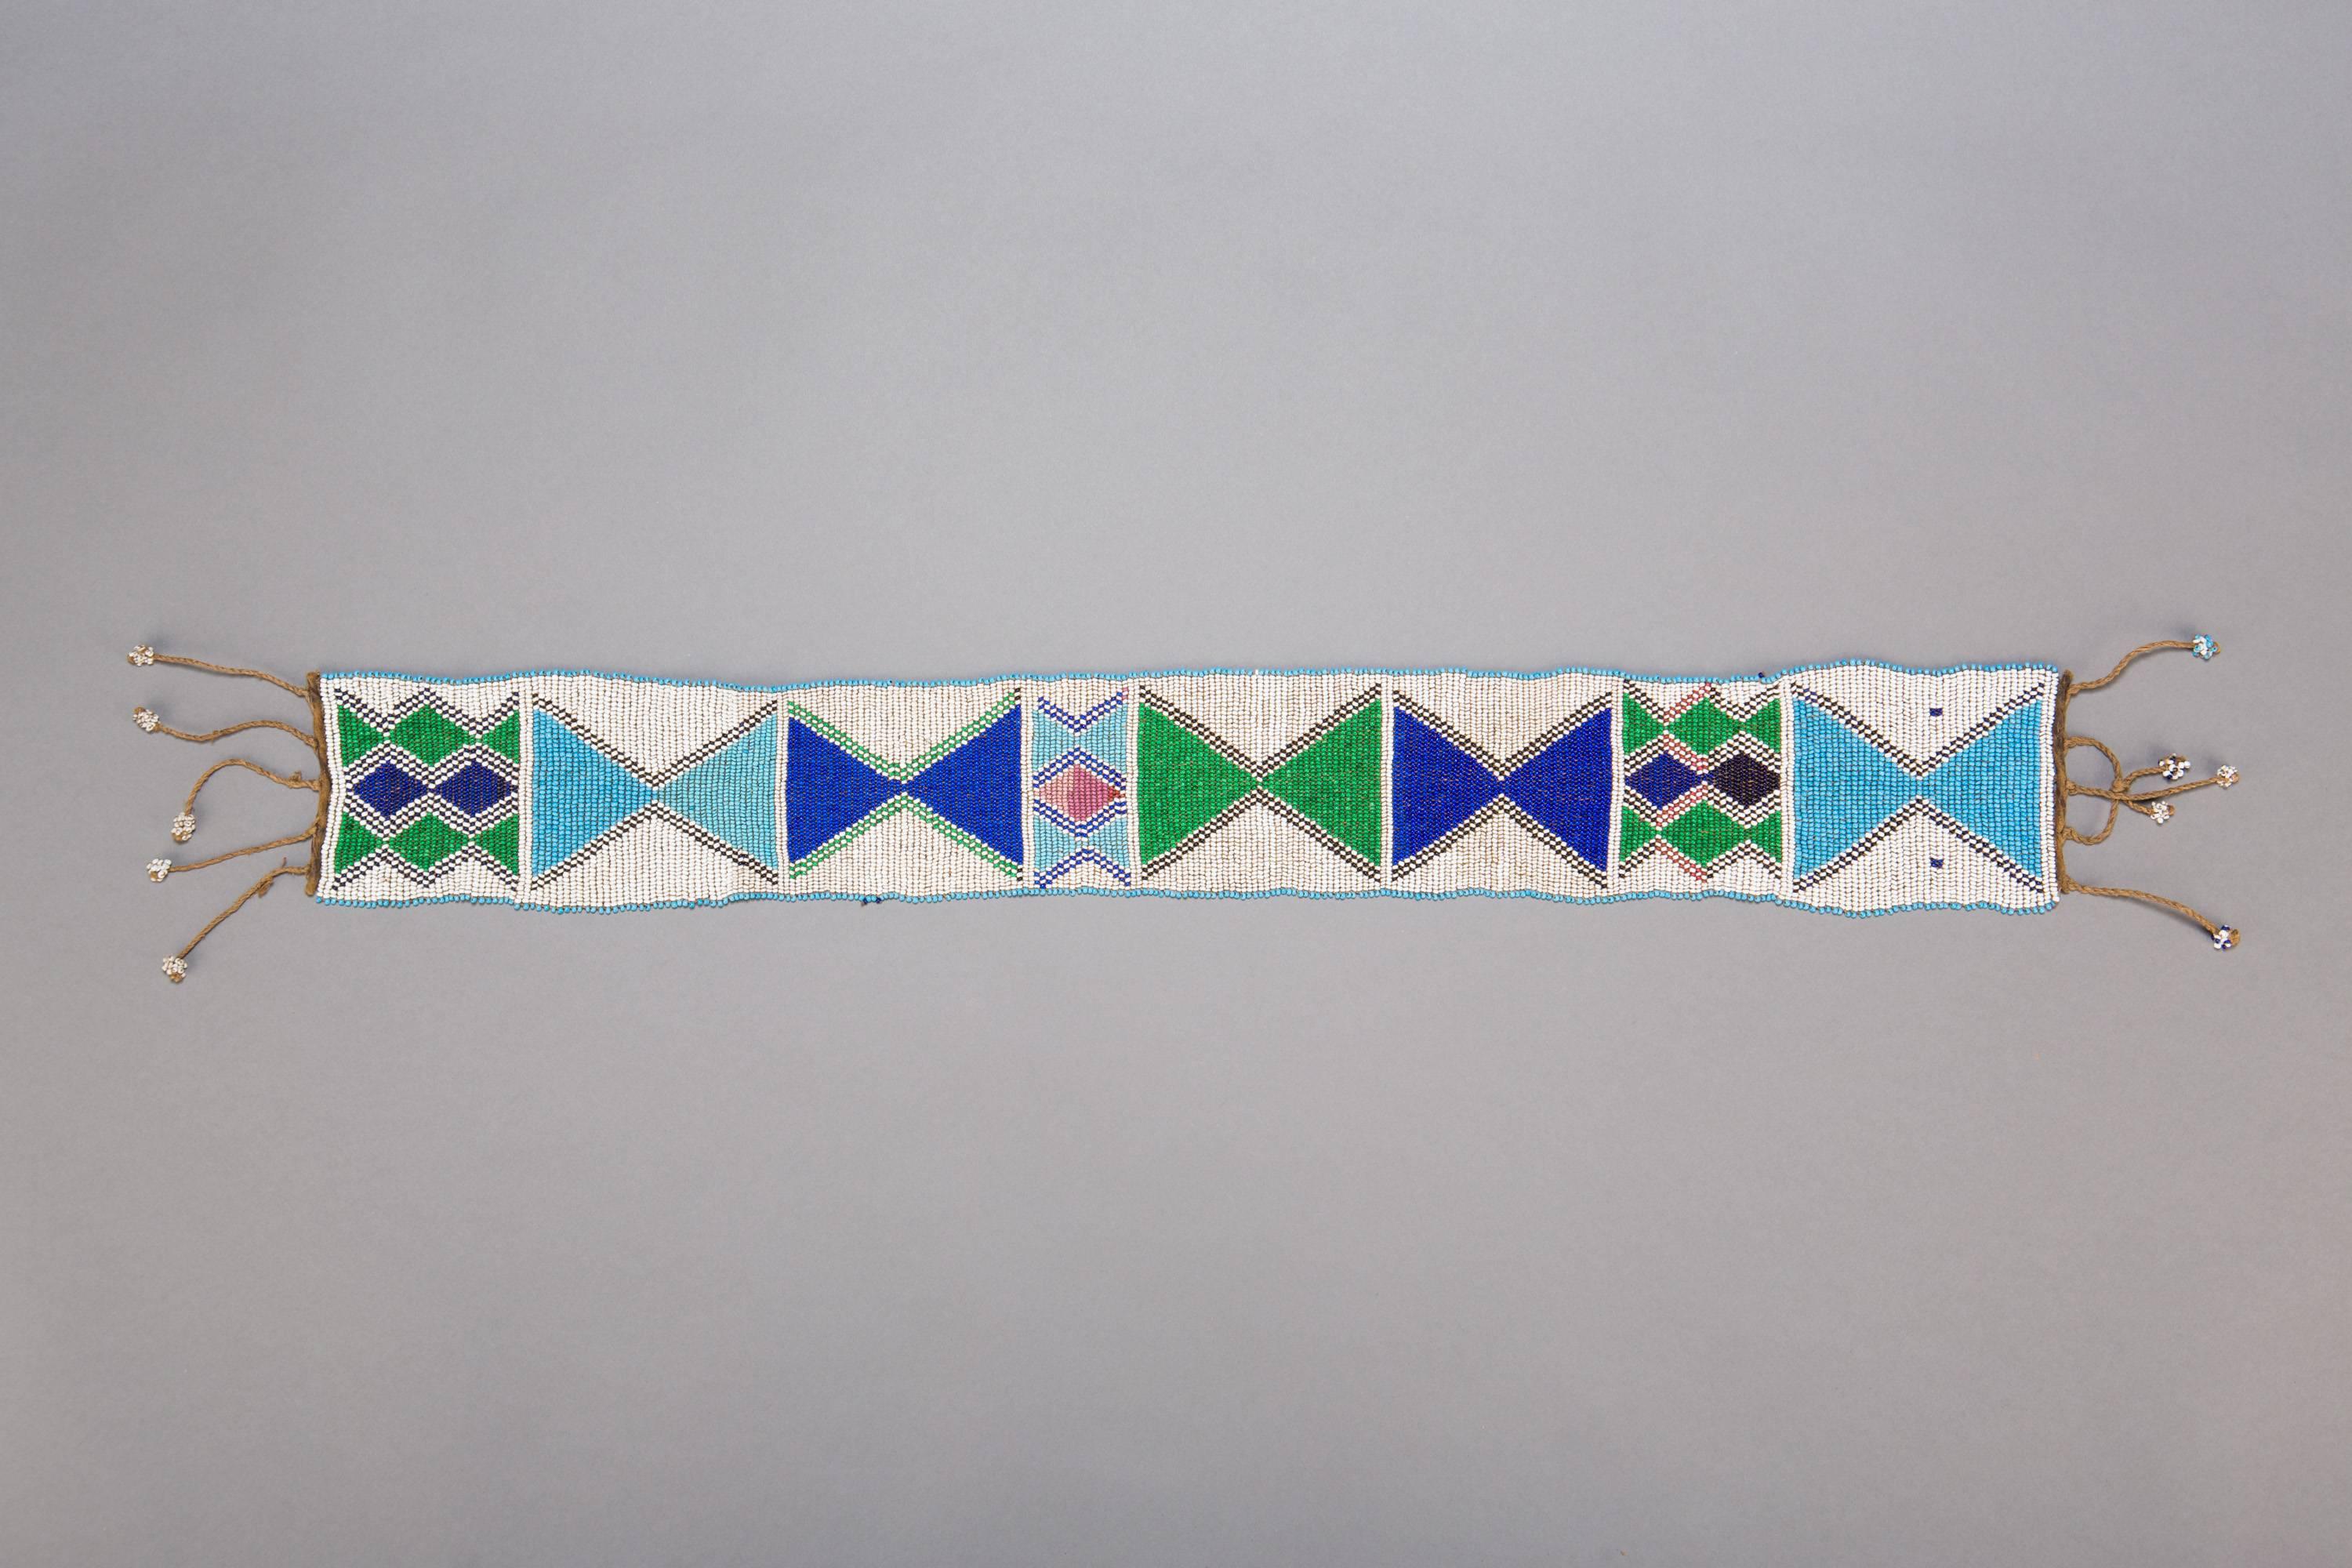 A lovely beadwork sash in white, green, and blue with delicate tassels at either end. Yao beadcraft commonly features triangular motifs, and this sash is no exception, featuring horizontally aligned sets of triangular forms joining in hourglass